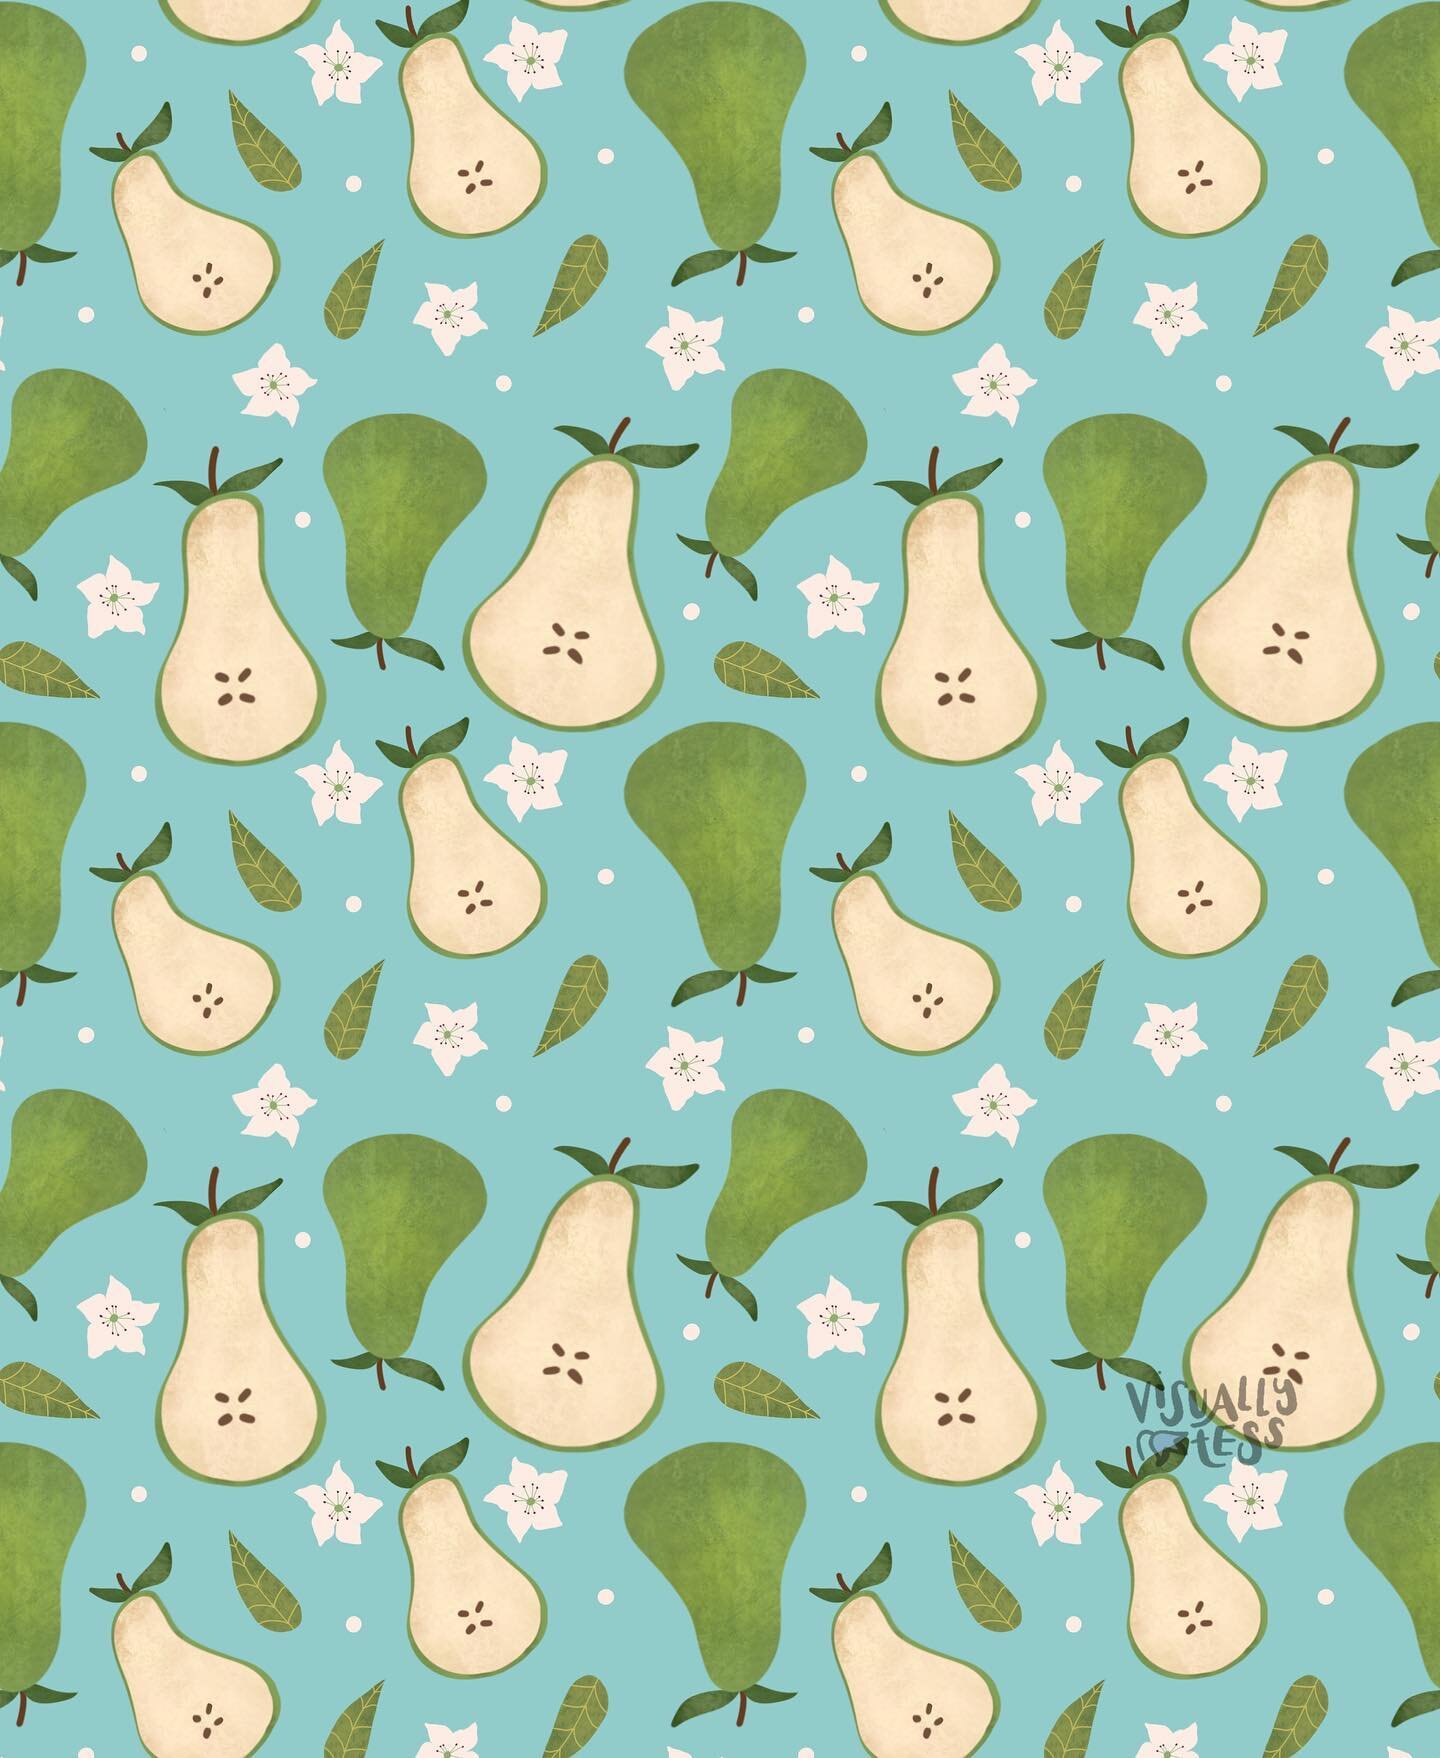 Pears, pears, pears 🍐 I drew one last week and now I&rsquo;m obsessed with drawing them 😅😂
.
Which background colour is your favourite? I really love the blue but the effect of the pink!! ✨☀️
.
#pear #pears #surfacepatterndesign #pattern #patternd